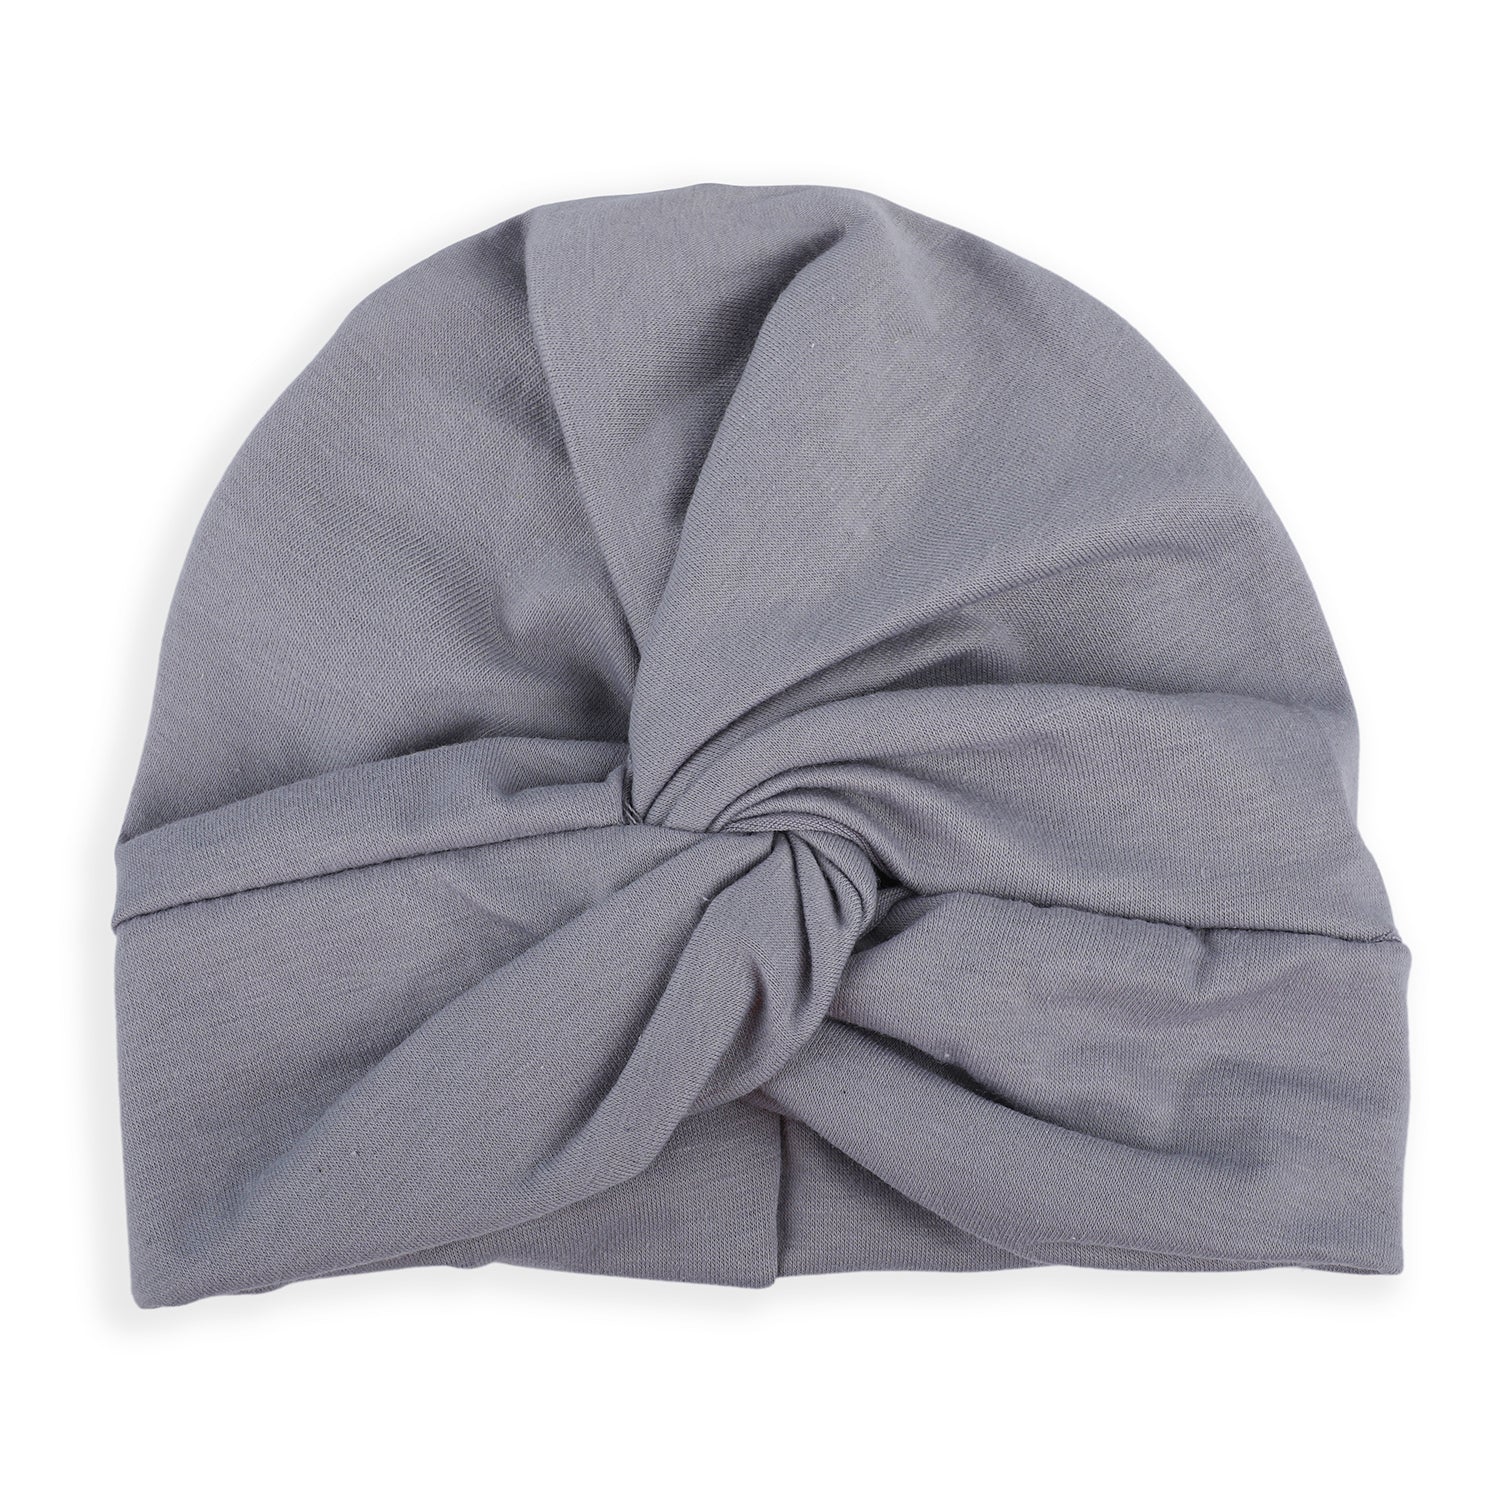 Cute Knotted Turban Cap Infant Beanie - Grey - Baby Moo